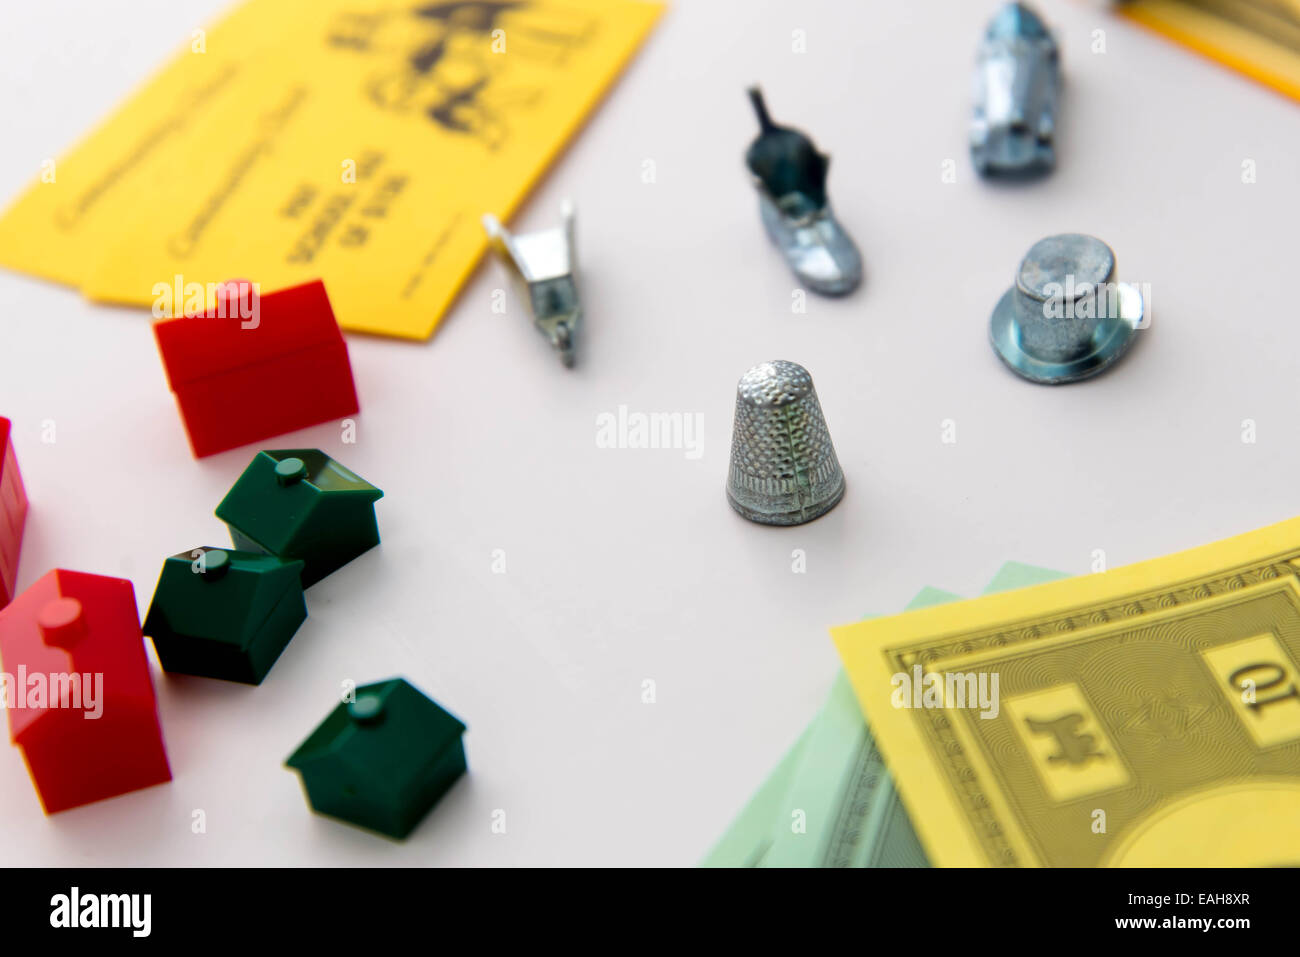 Monopoly board game Stock Photo